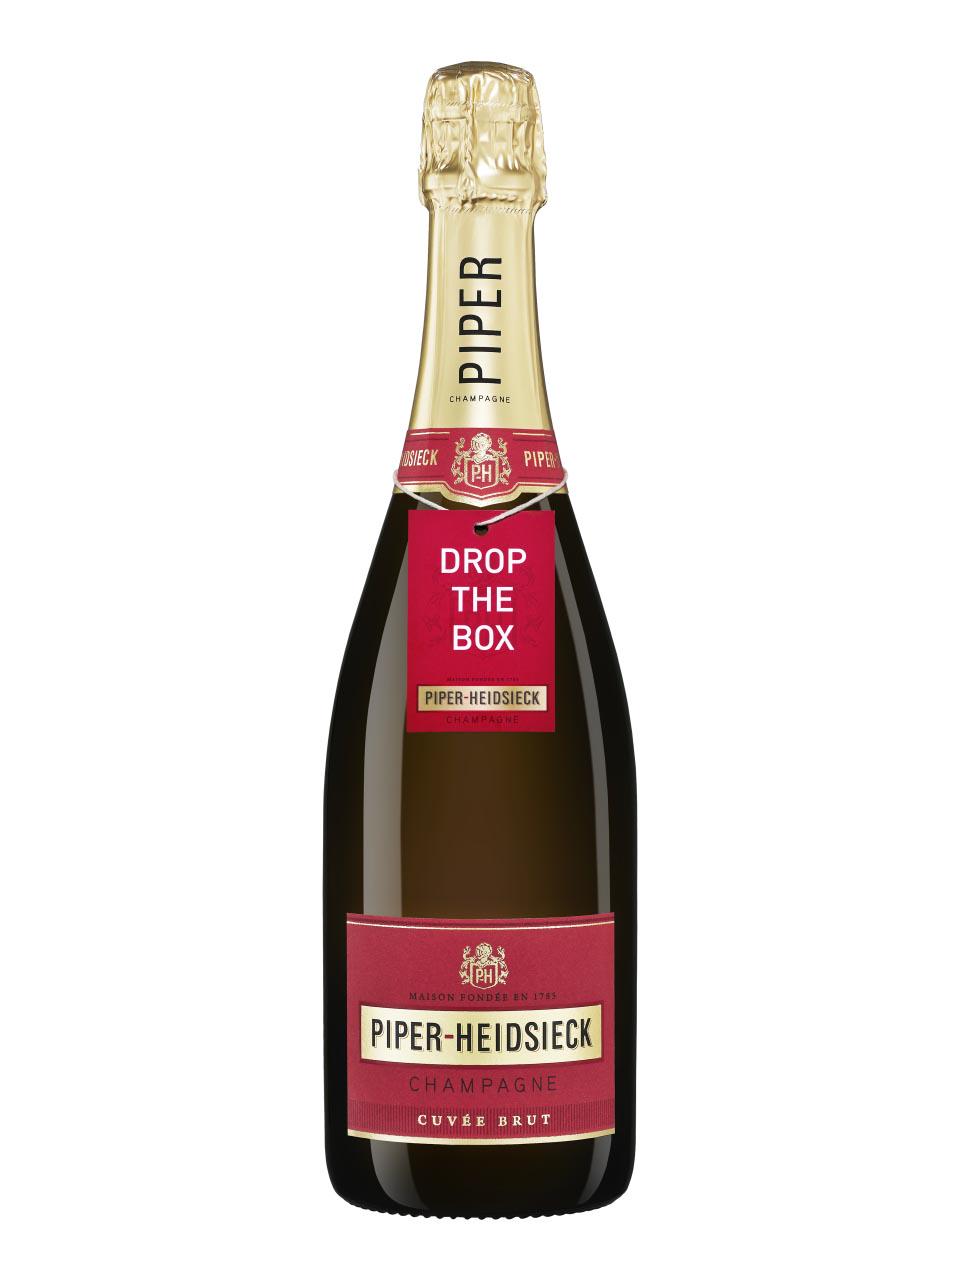 Airport AOC, brut, weiß Online Brut, Edition New Cuvée 0.75L Frankfurt box) Shopping (Chinese Limited Piper-Heidsieck, | Year gift Champagne,